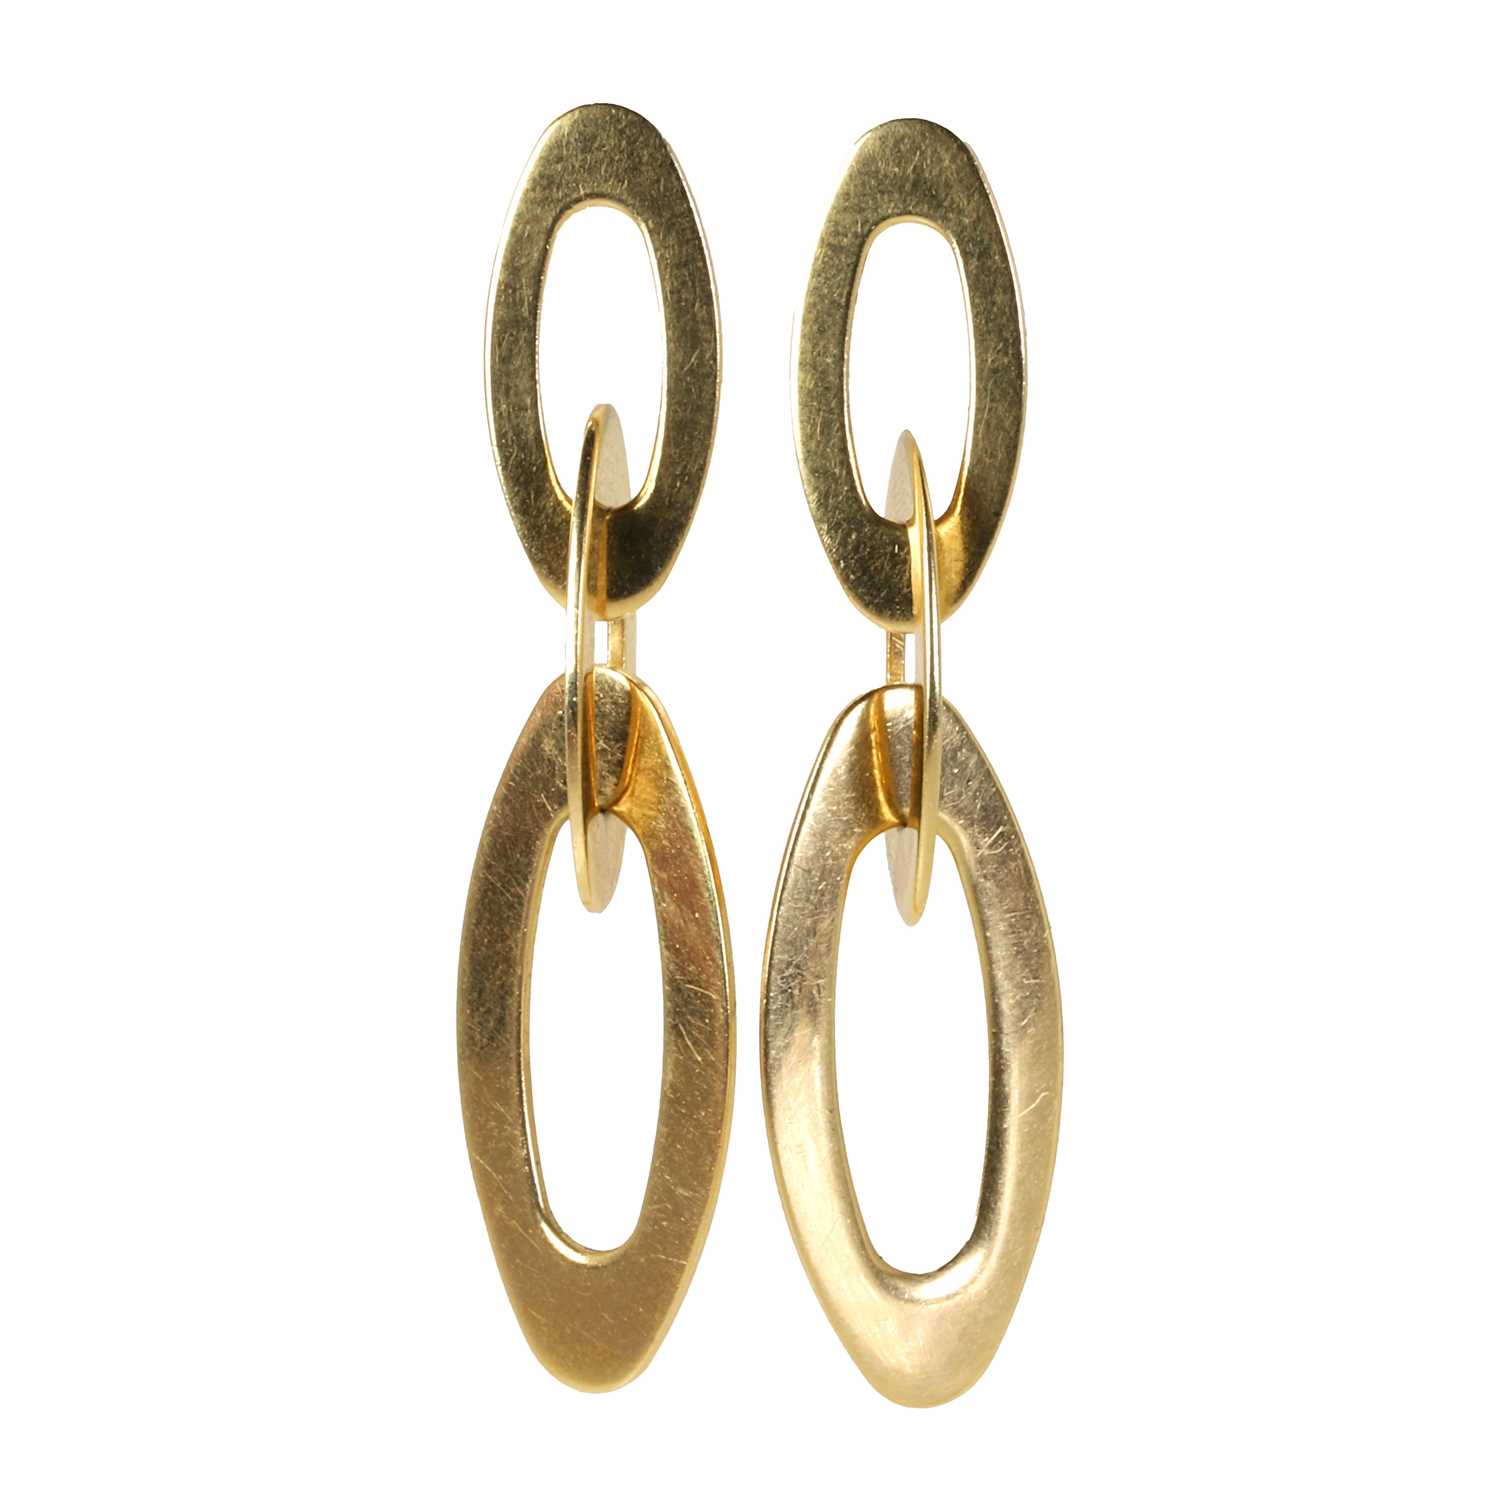 A pair of 18ct gold 'Chic & Shine' drop earrings, by Roberto Coin,